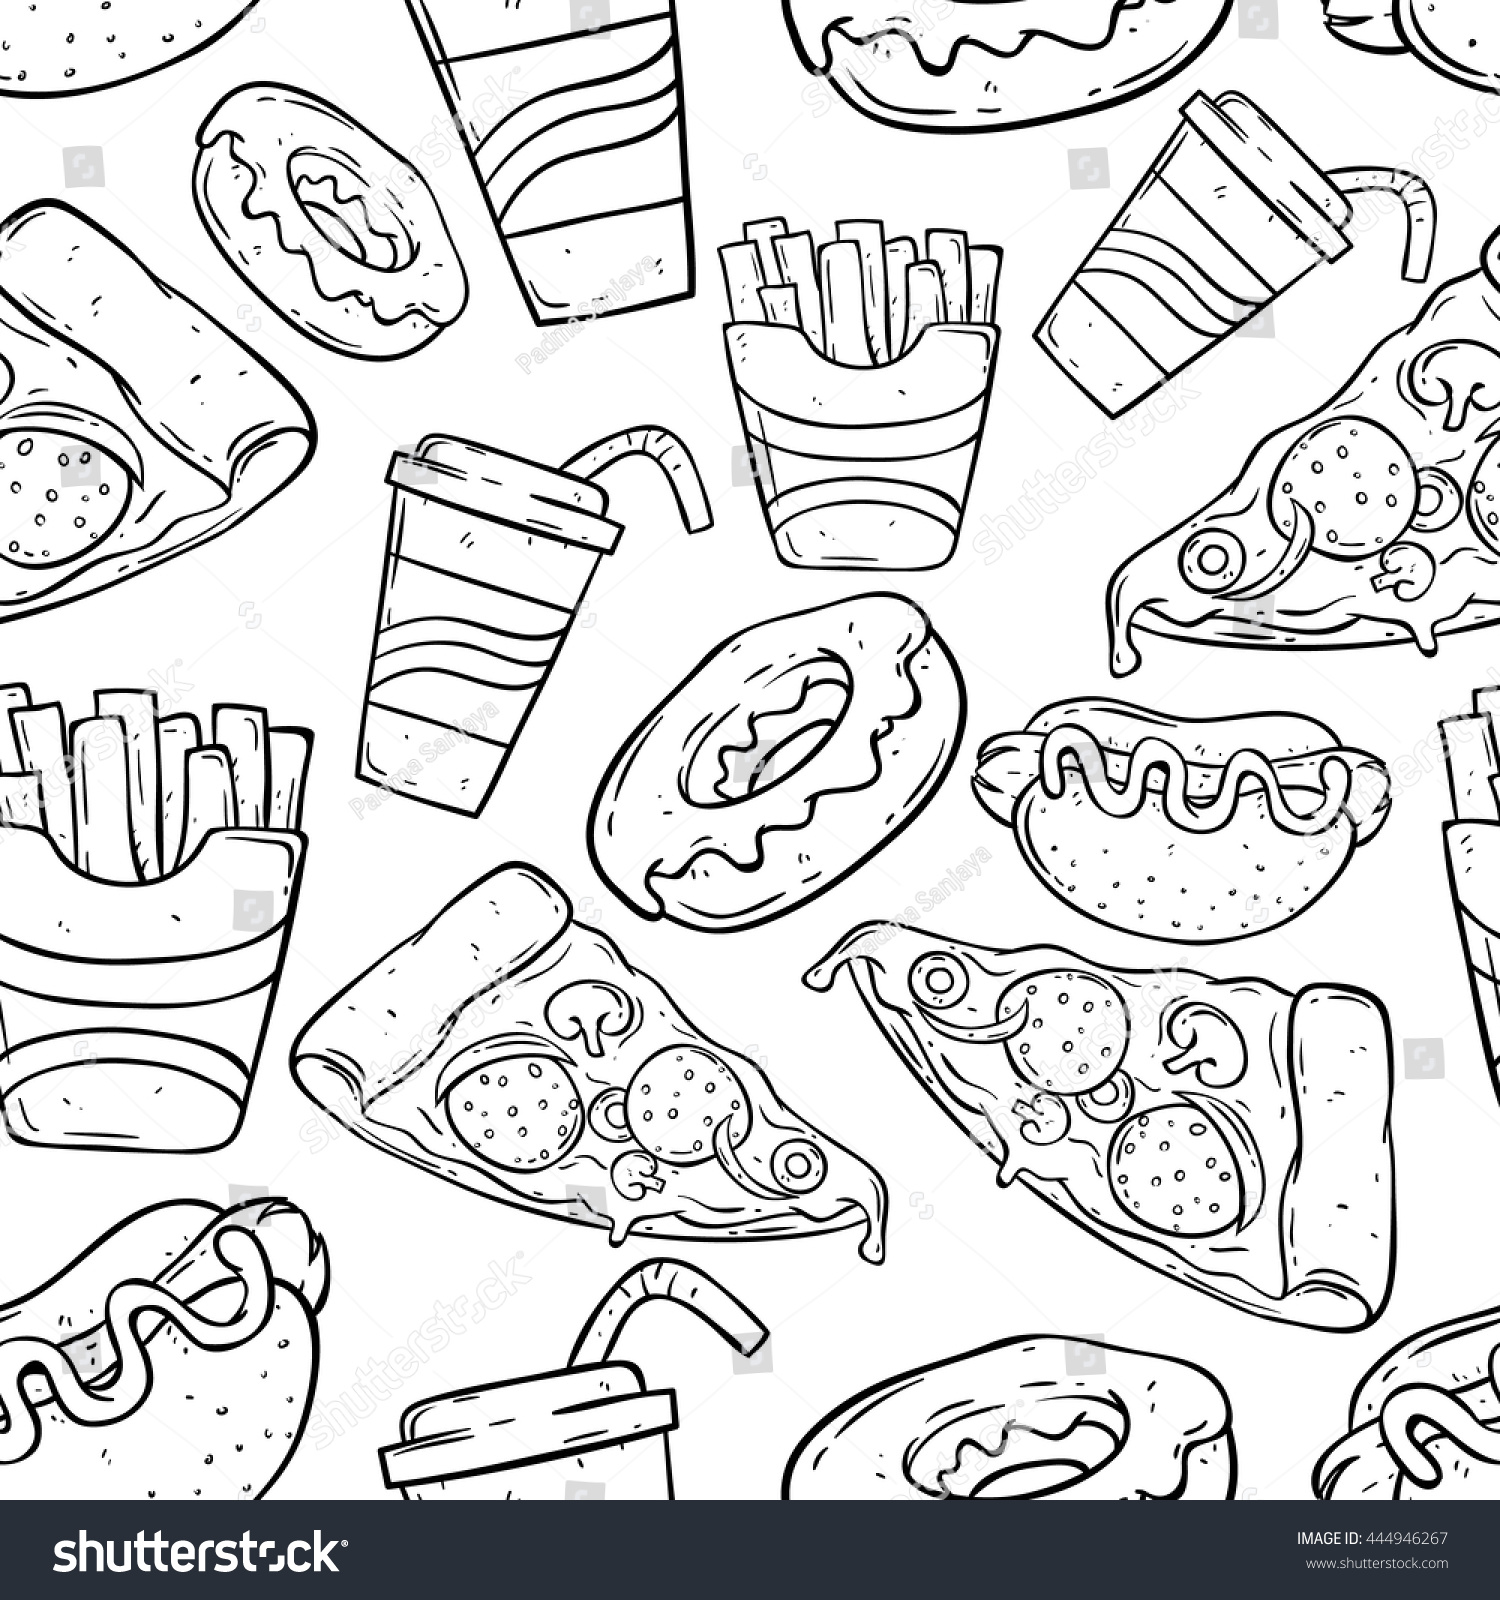 Fast Food Doodle Art Seamless Pattern Stock Vector Royalty Free